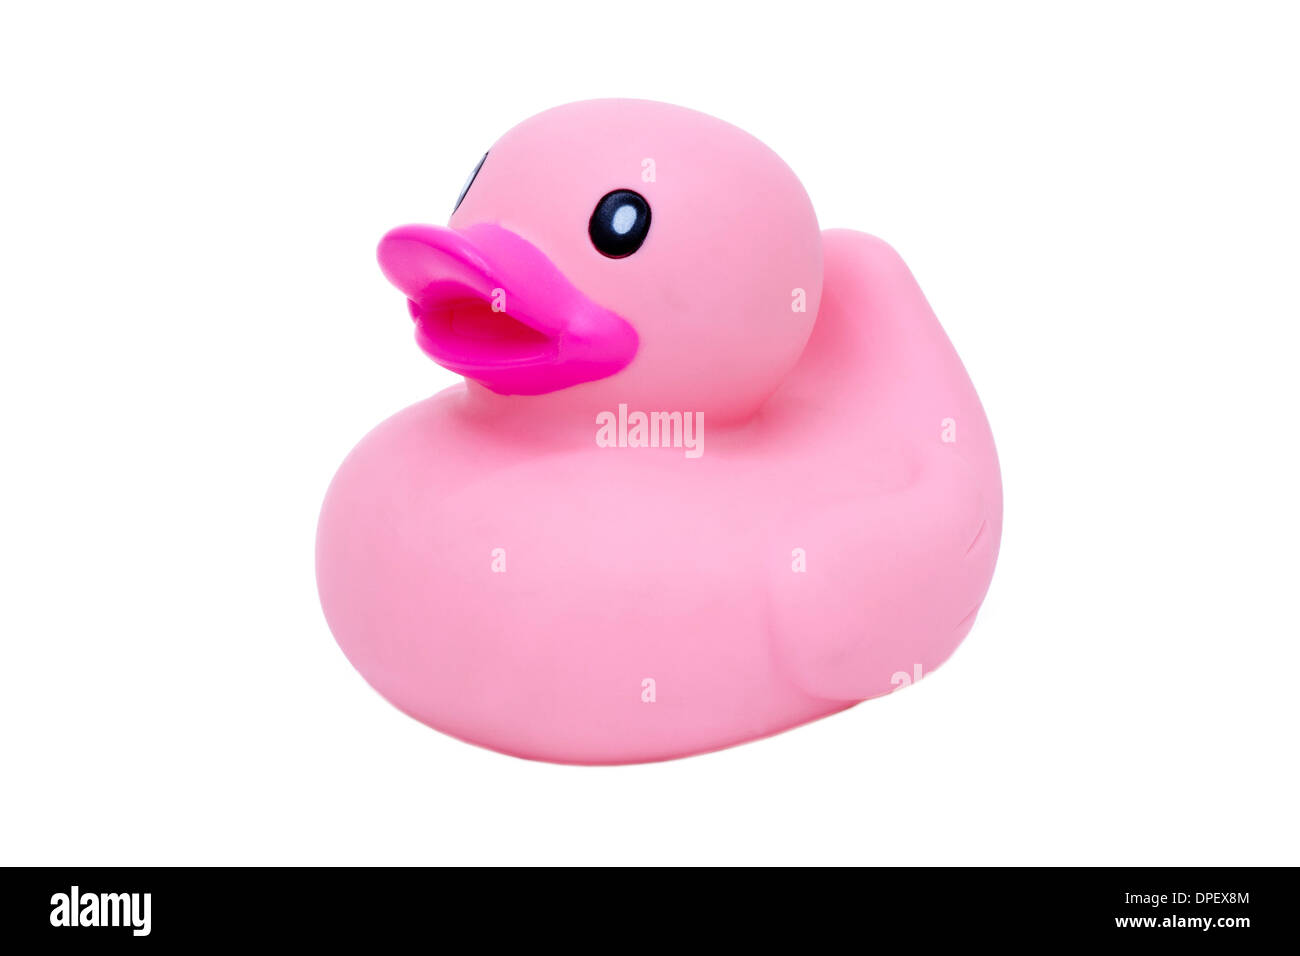 Pink rubber duck Stock Photo